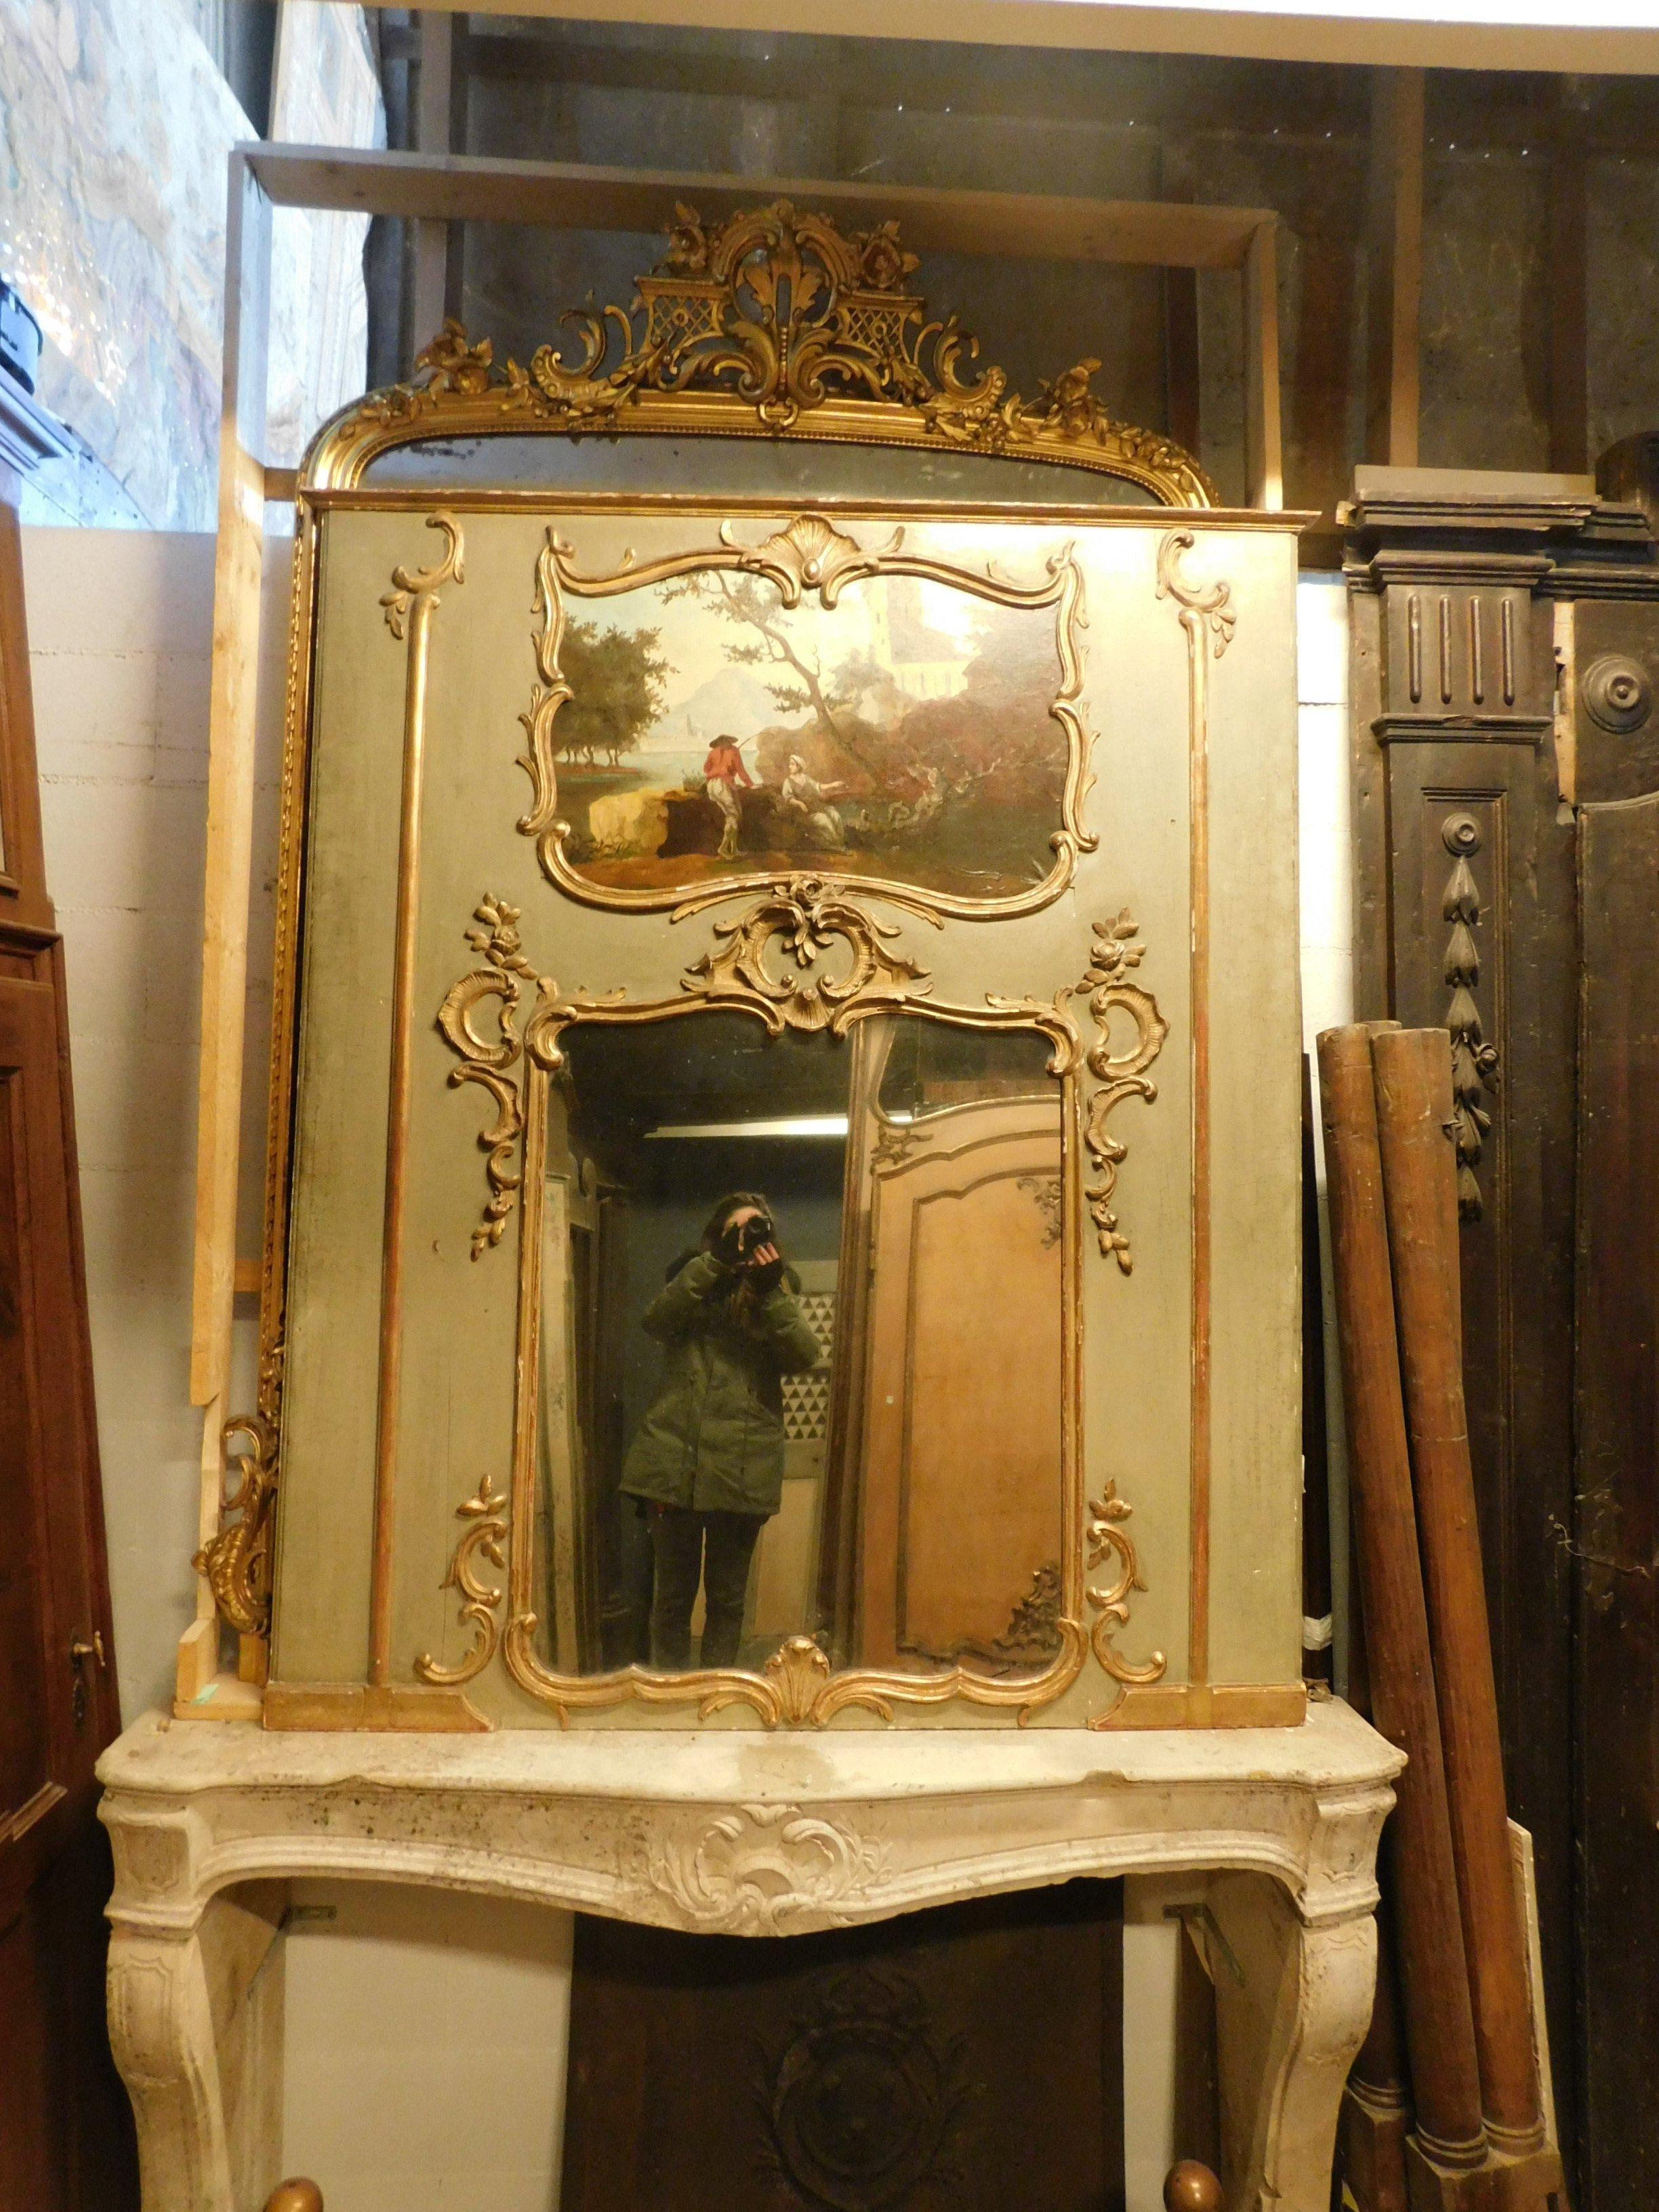 Wood Antique Louis XVI Mirror, green and gold with painting, 18th century France